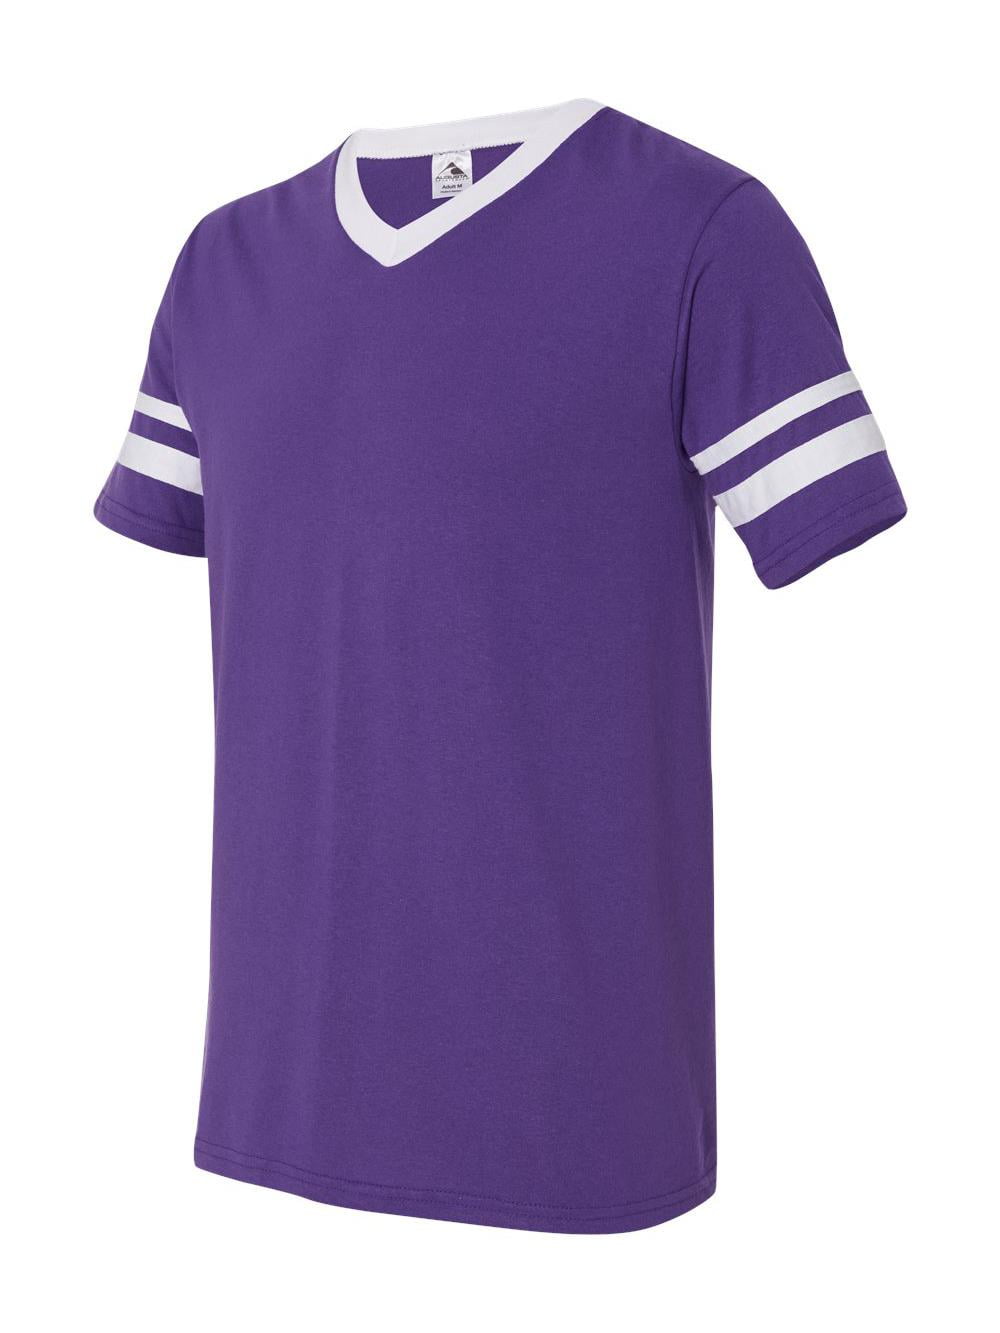 Augusta Sportswear V-Neck Jersey with Striped Sleeves Size up to 3XL ...